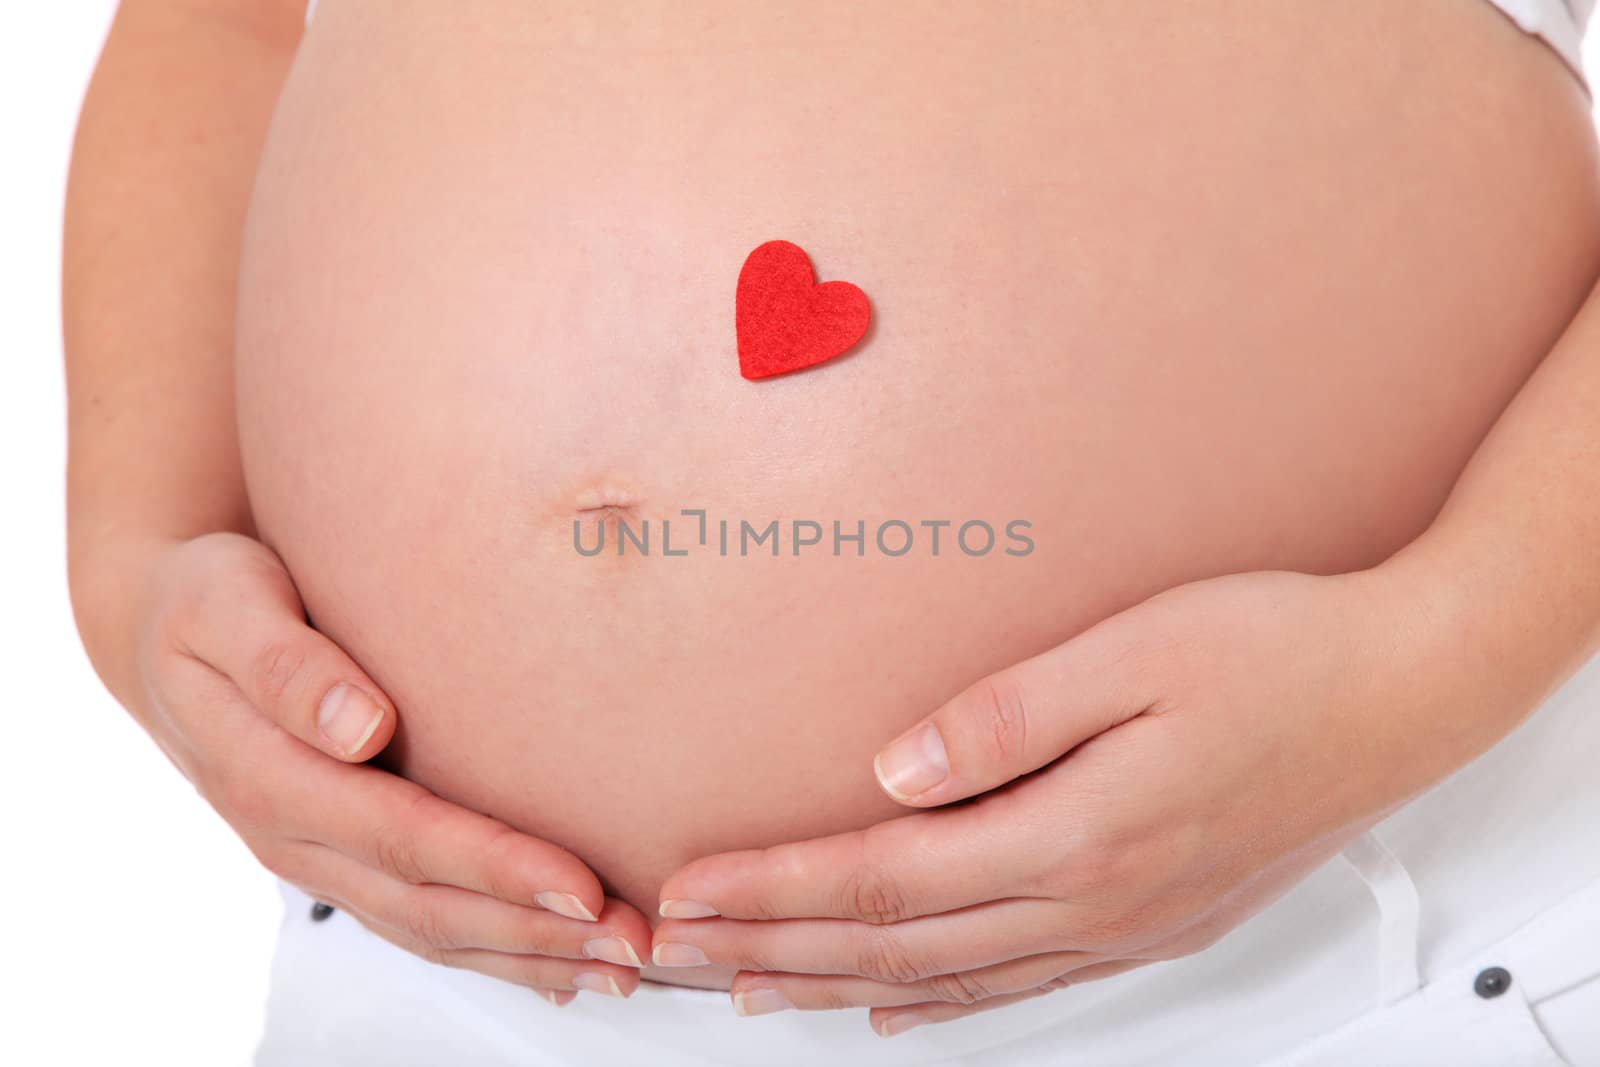 Pregnant woman with single red heart on her baby bump. All on white background.